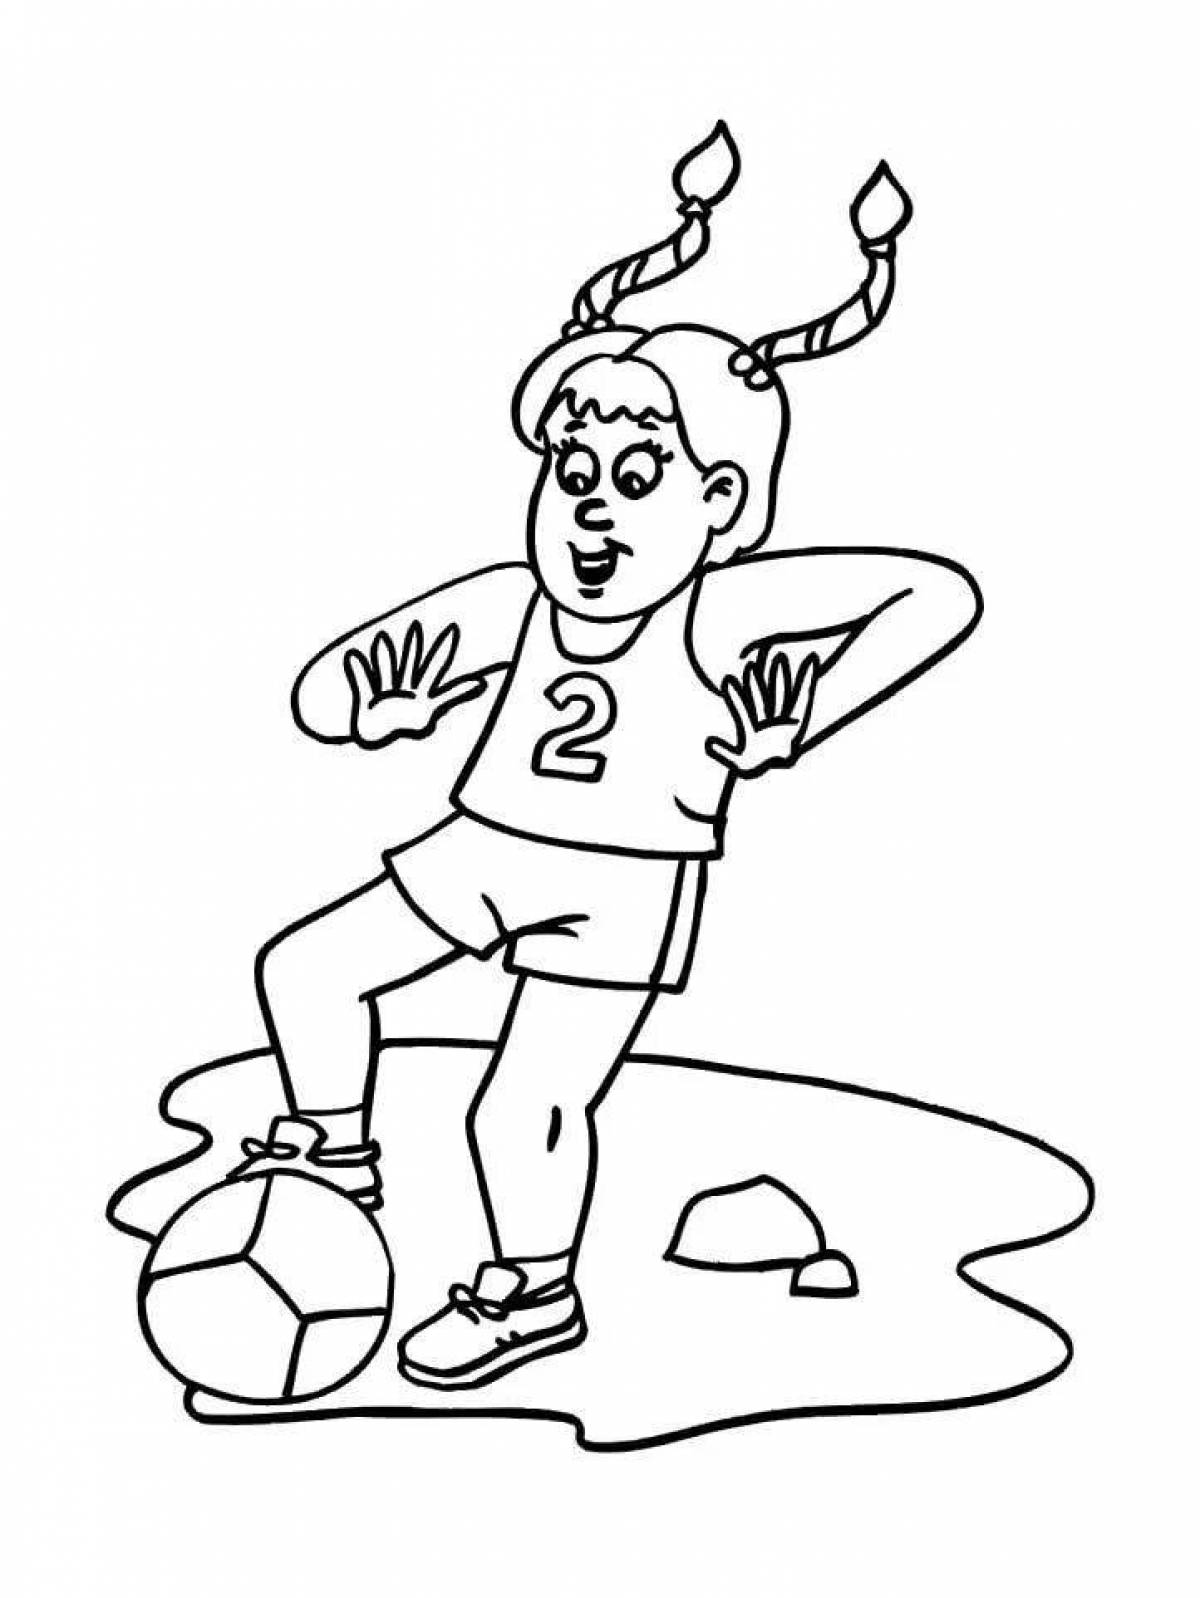 Coloring page wonderful football player for kids